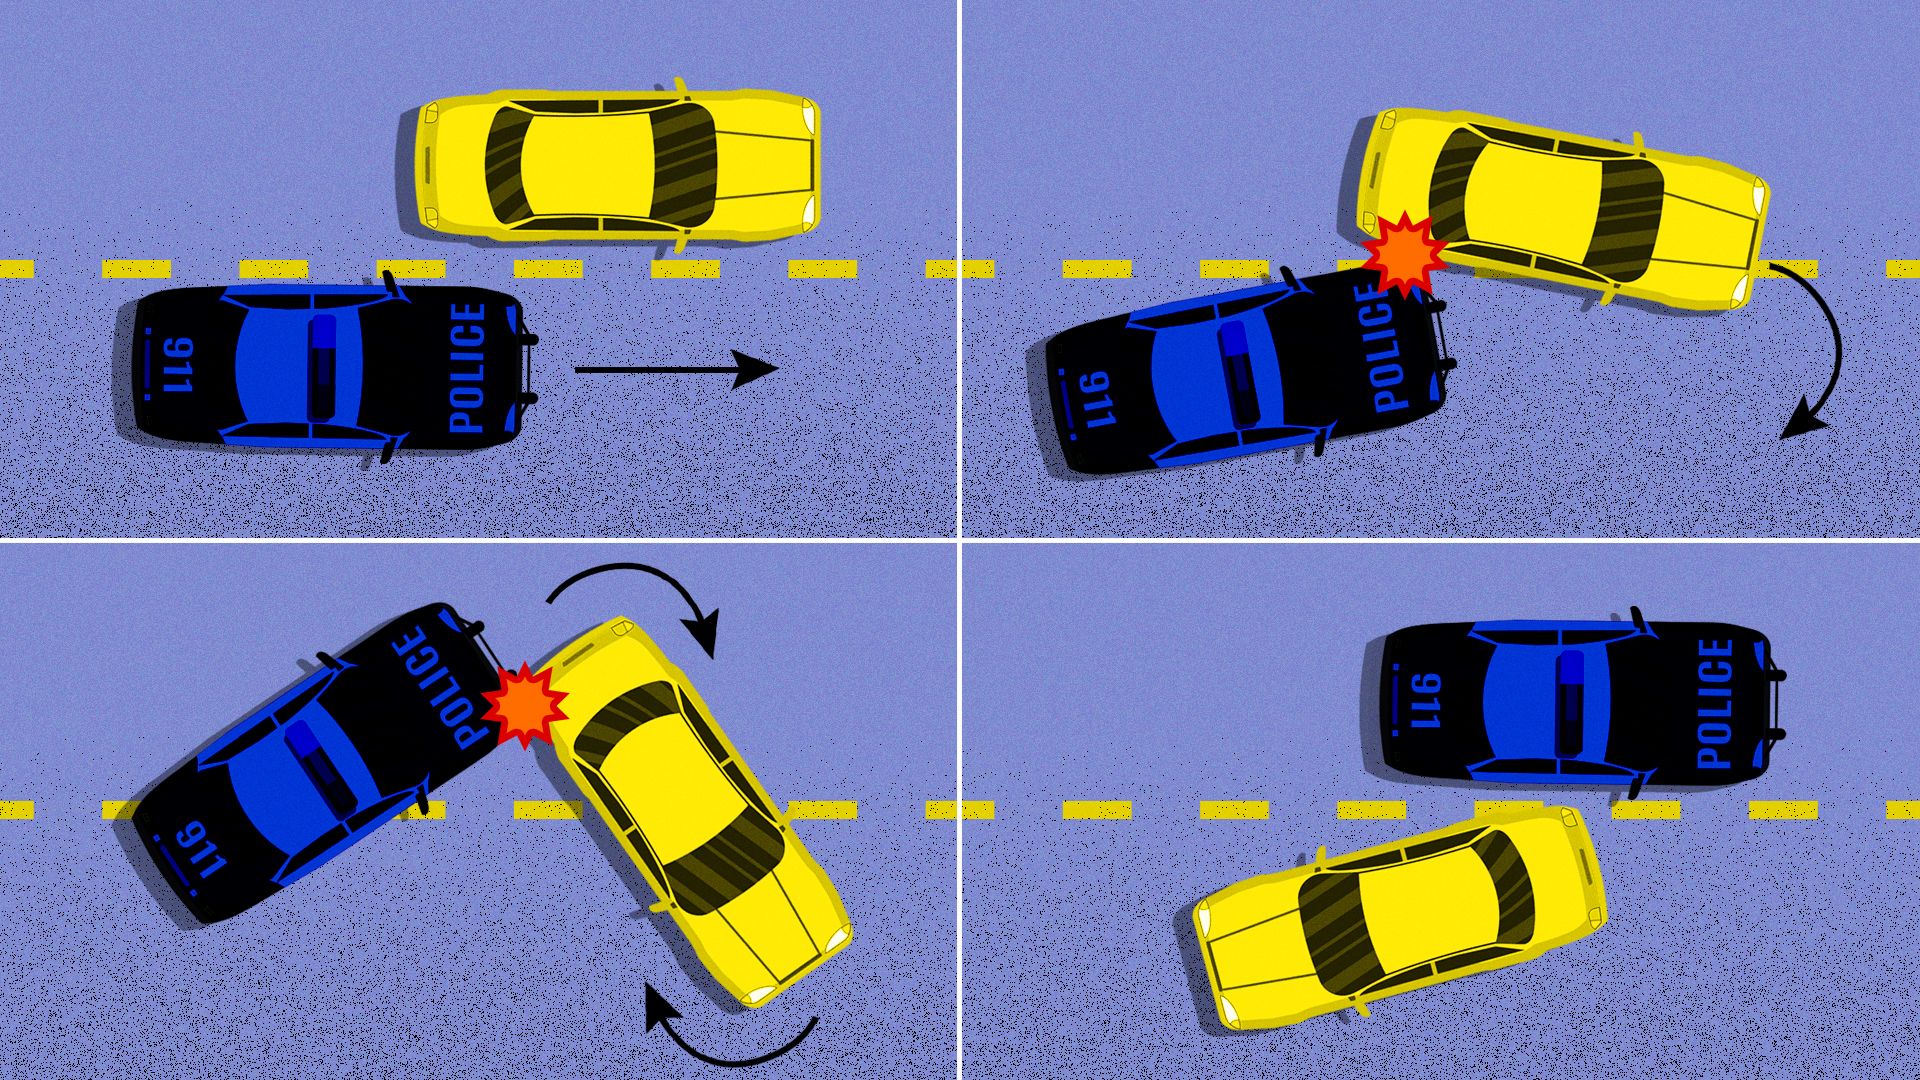  Illustration showing a PIT maneuver between a blue police car and yellow civilian car.